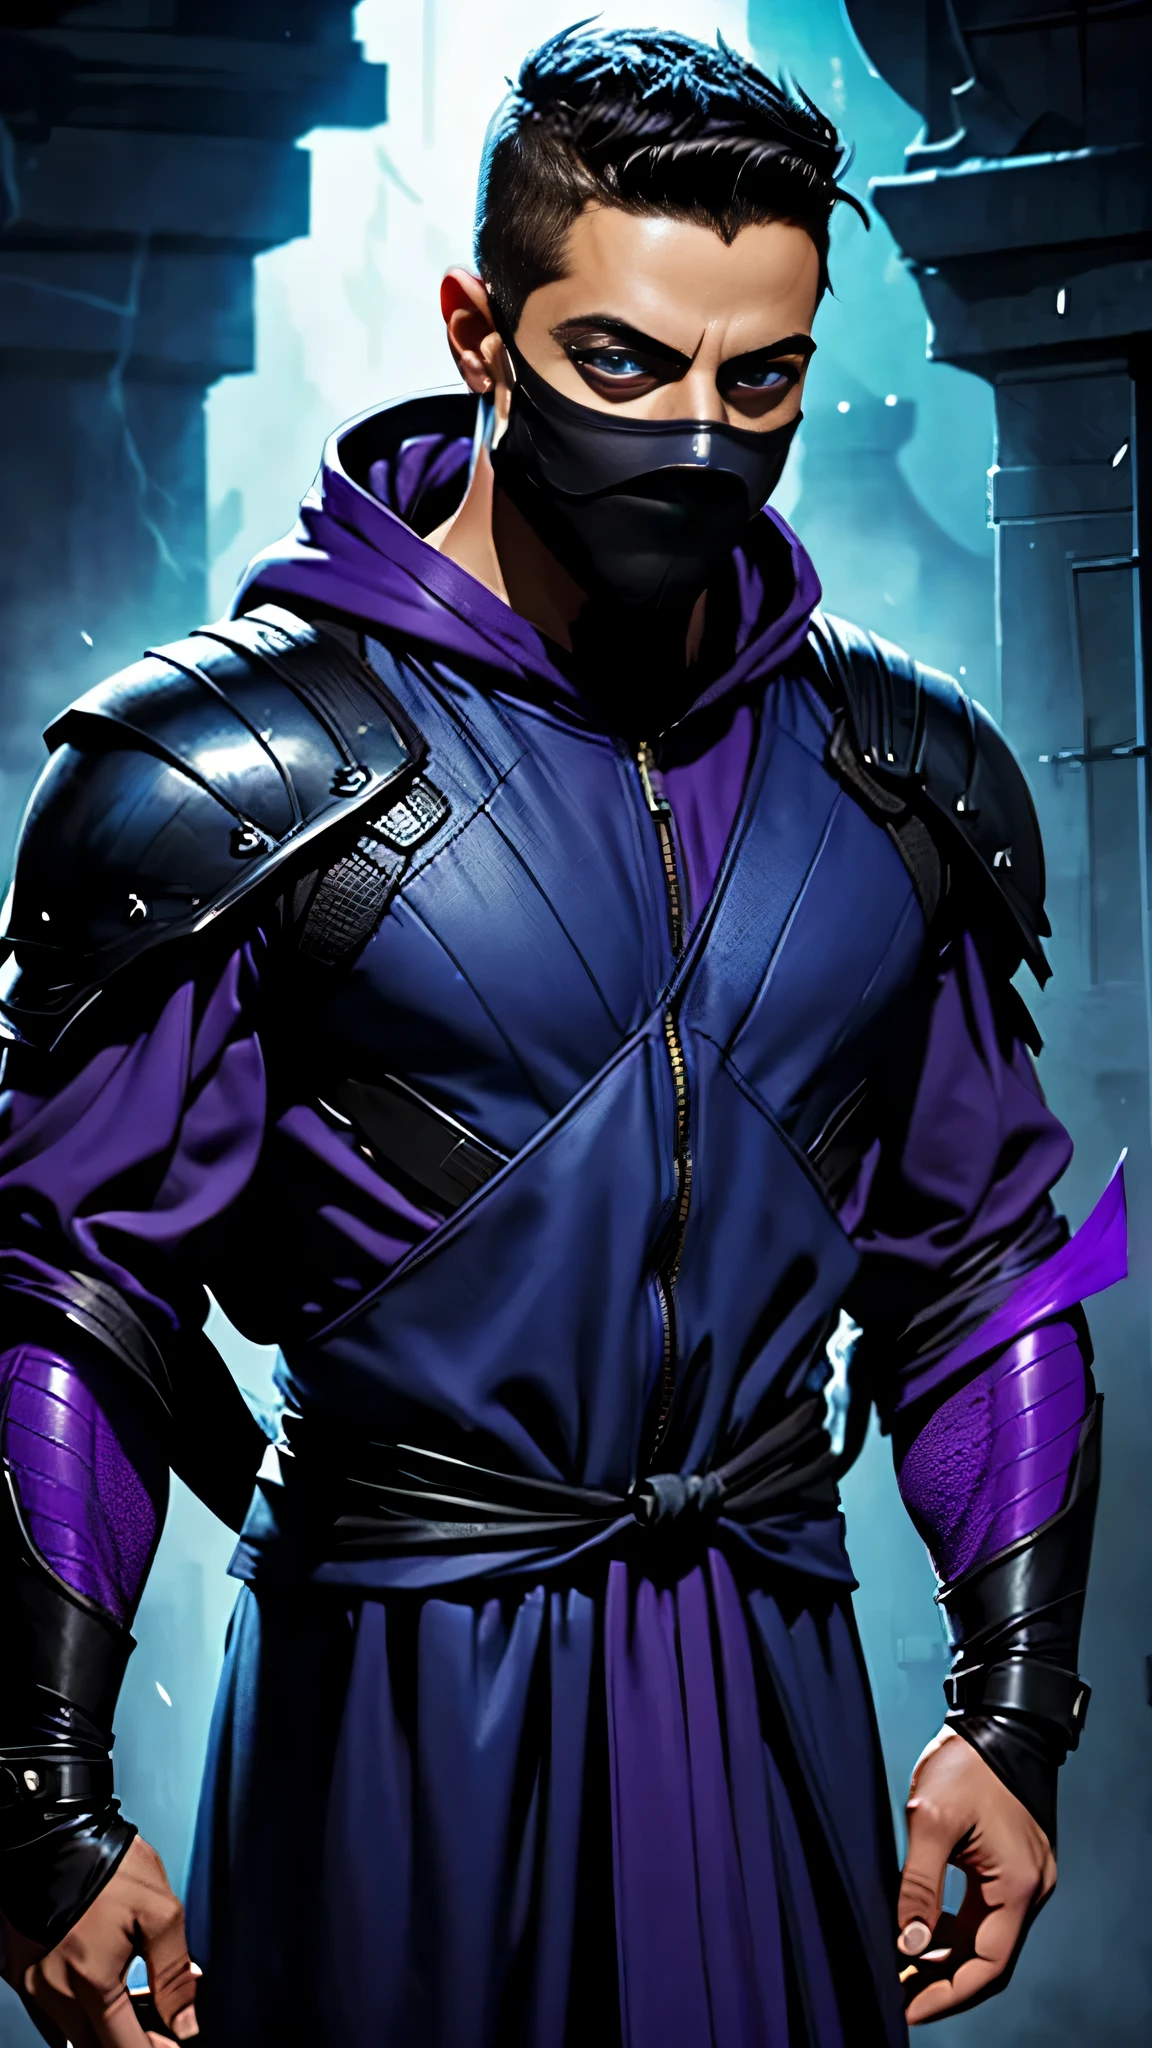 ((Rami Malek)) as Rain from Mortal Kombat, (1boy), wears a (purple ninja outfit), attire is adorned with intricate designs, (ninja mask covered his lower face), ((eyes glow with a radiant light blue hue)), thunder on background, intricate, high detail, sharp focus, dramatic, photorealistic painting art by greg rutkowski